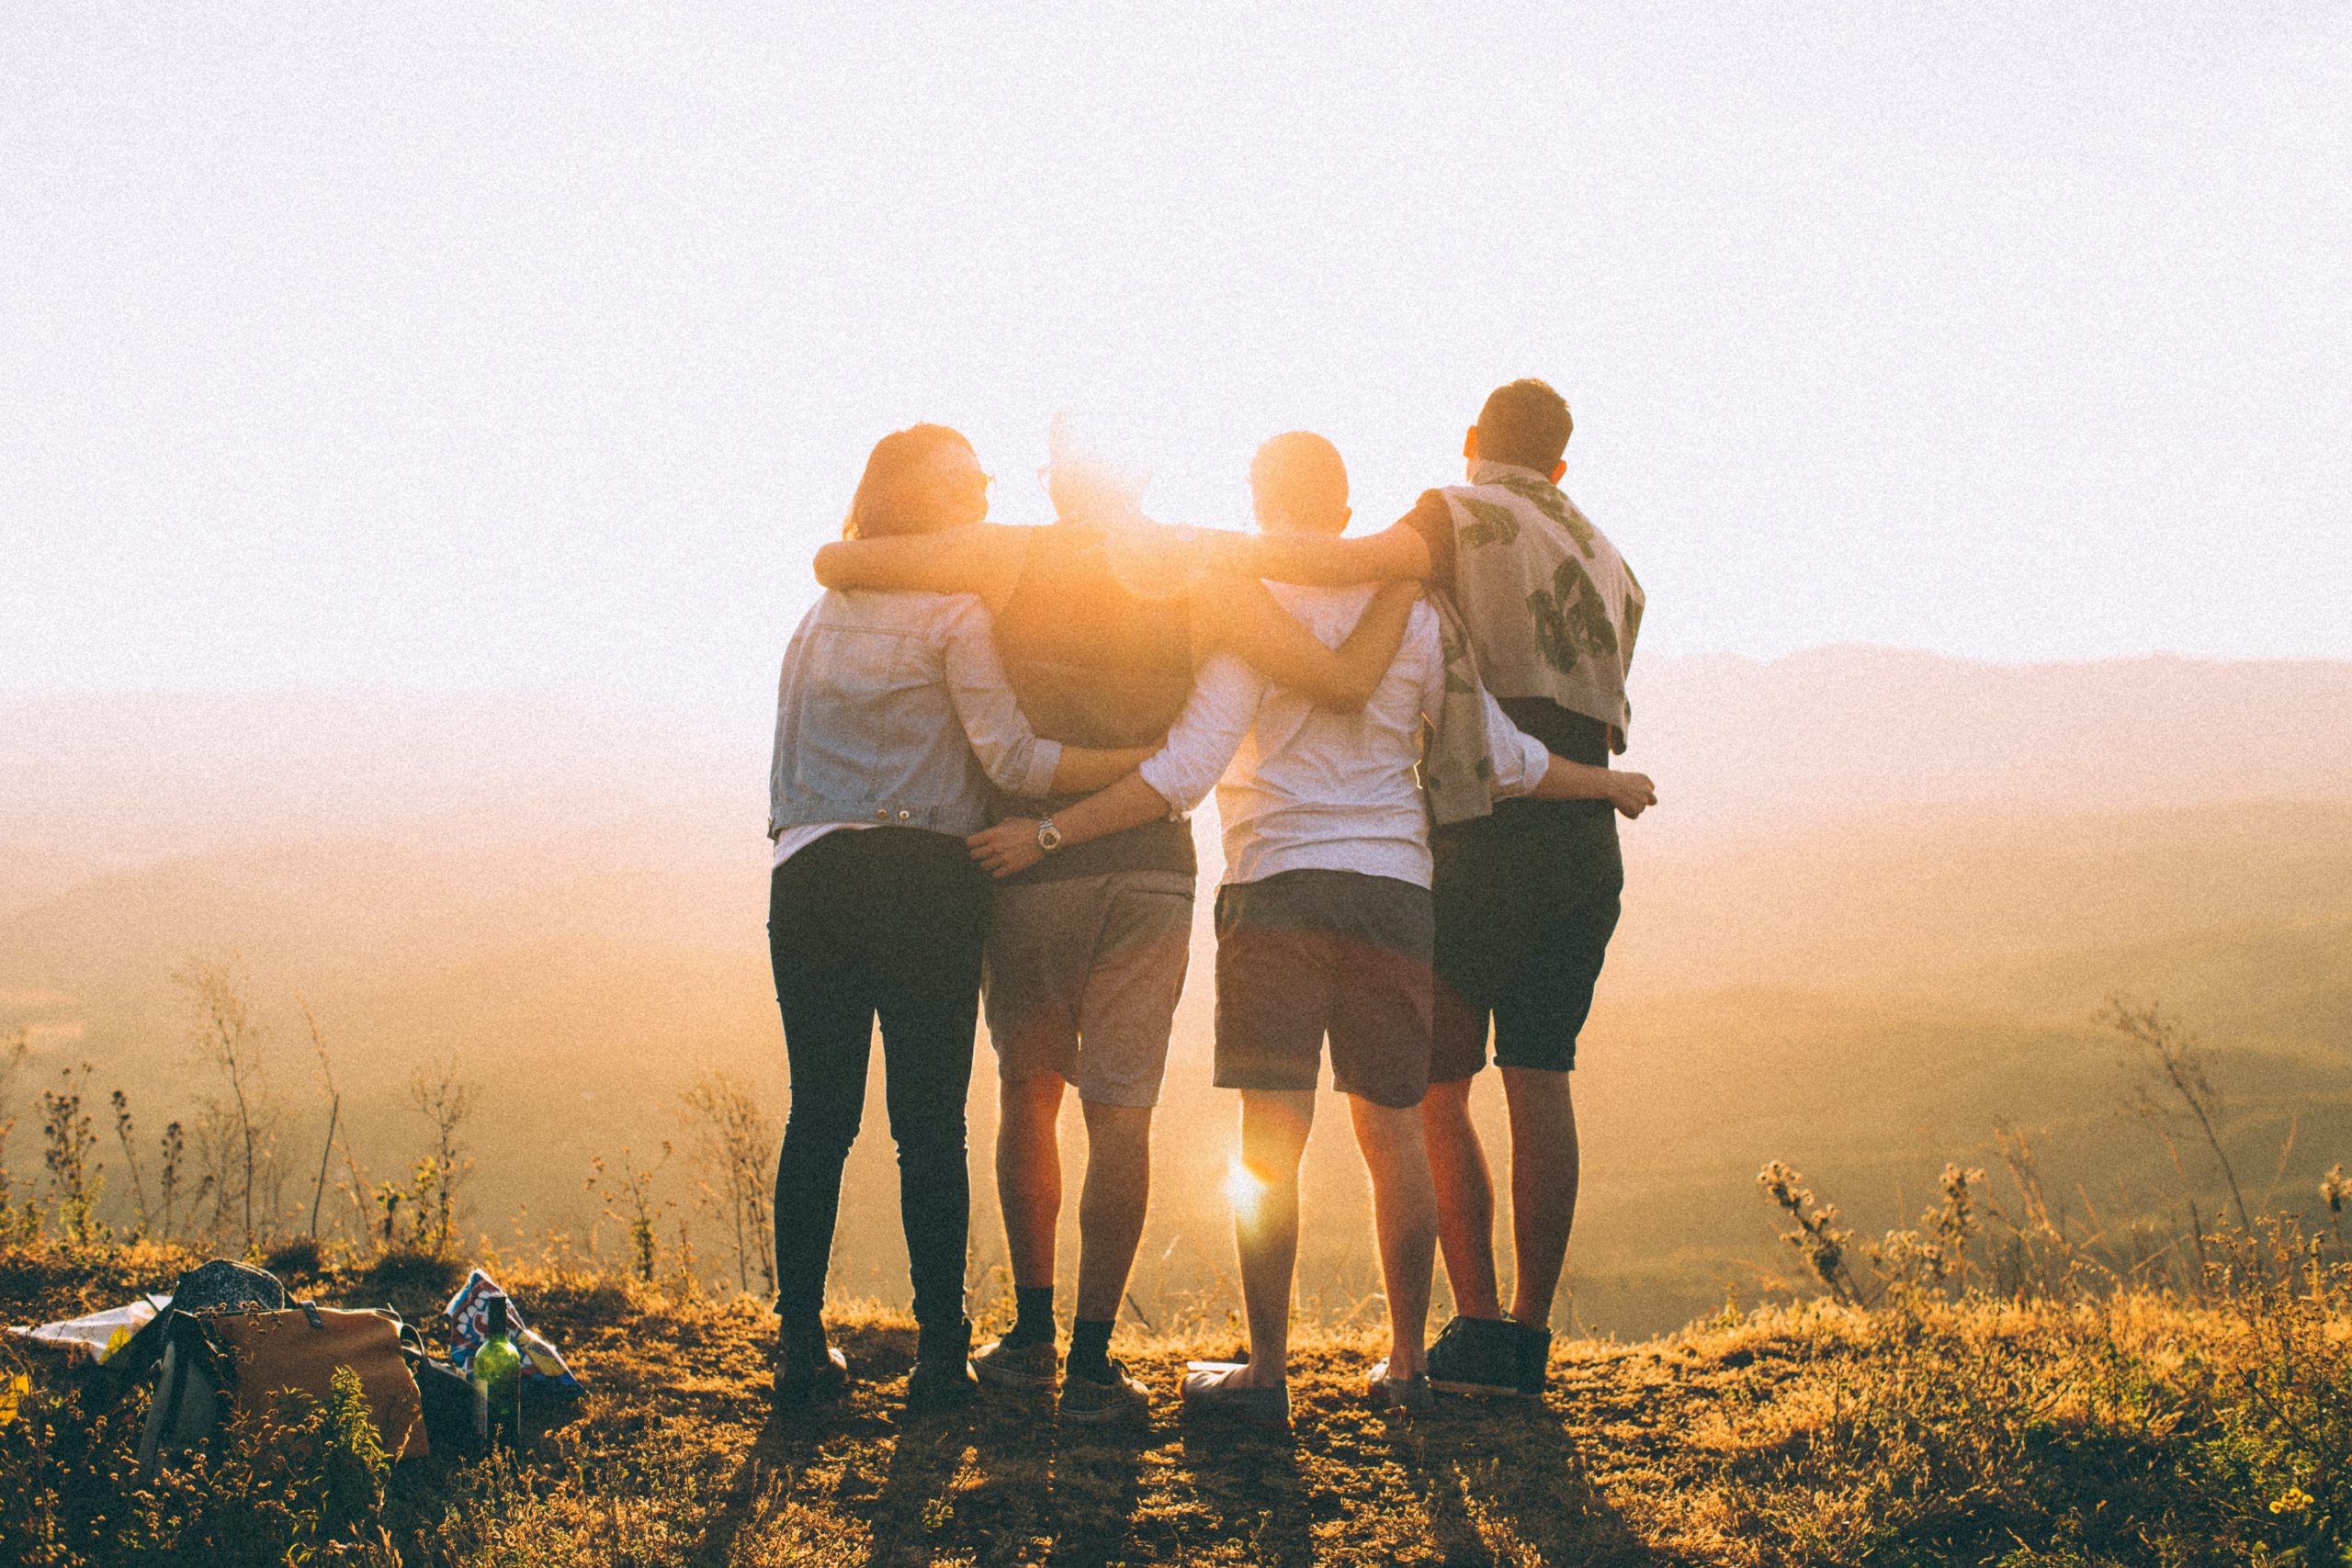 A group of four friends stands with their backs to the camera, backlit by a sunrise.